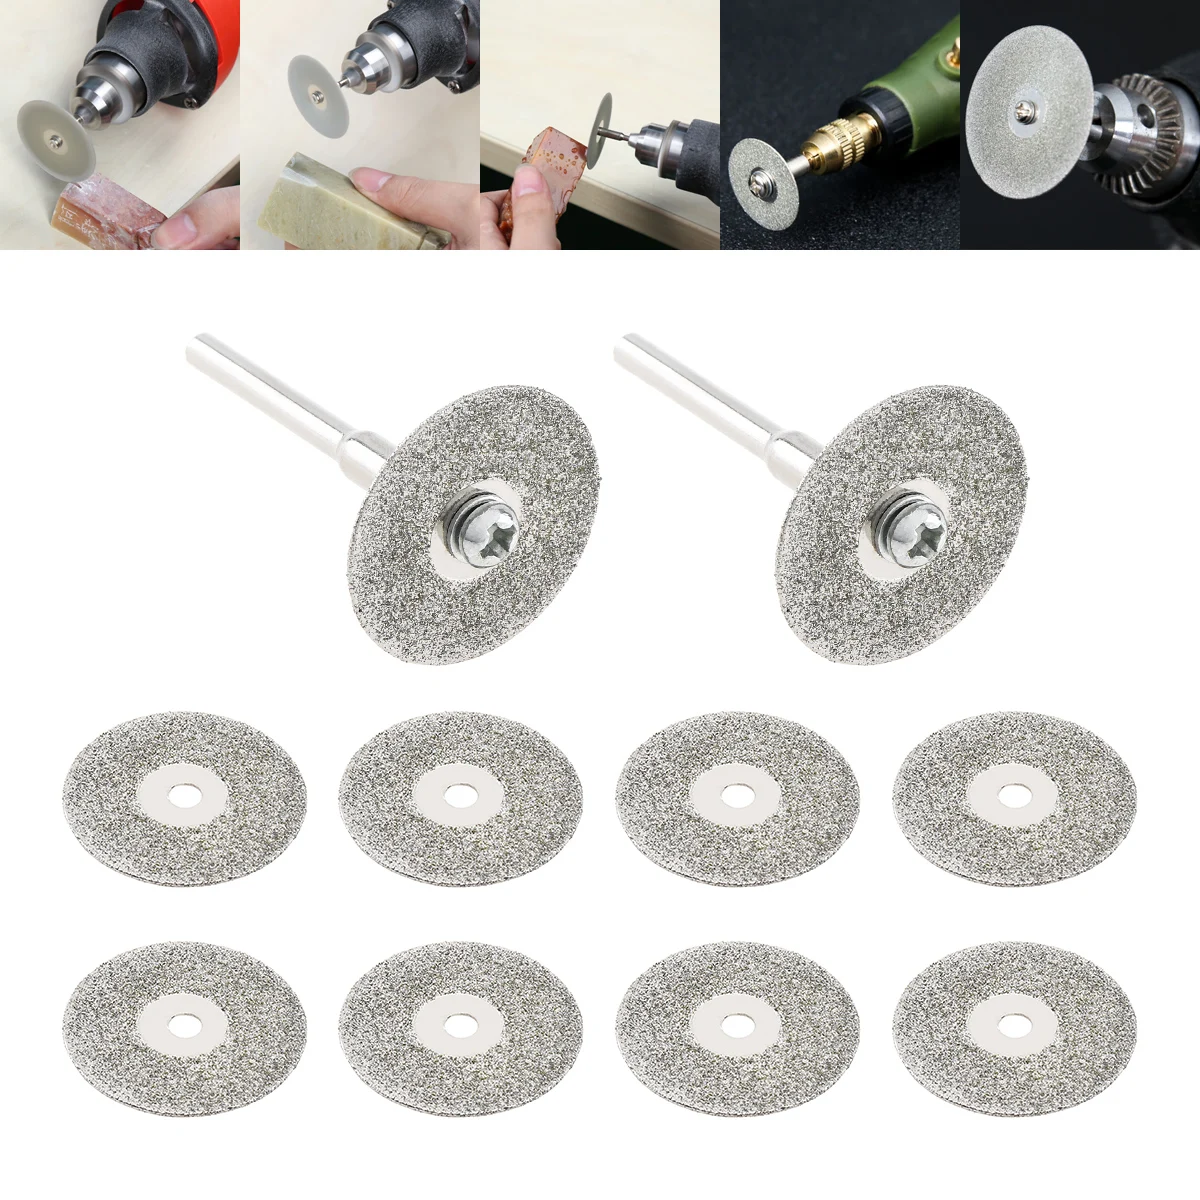 

10pcs 22mm Diamond Cutting Discs Multifunctional Saw Blade with 2pcs 3mm Diameter Fixed Rod for Glass Metal Cutting Home DIY